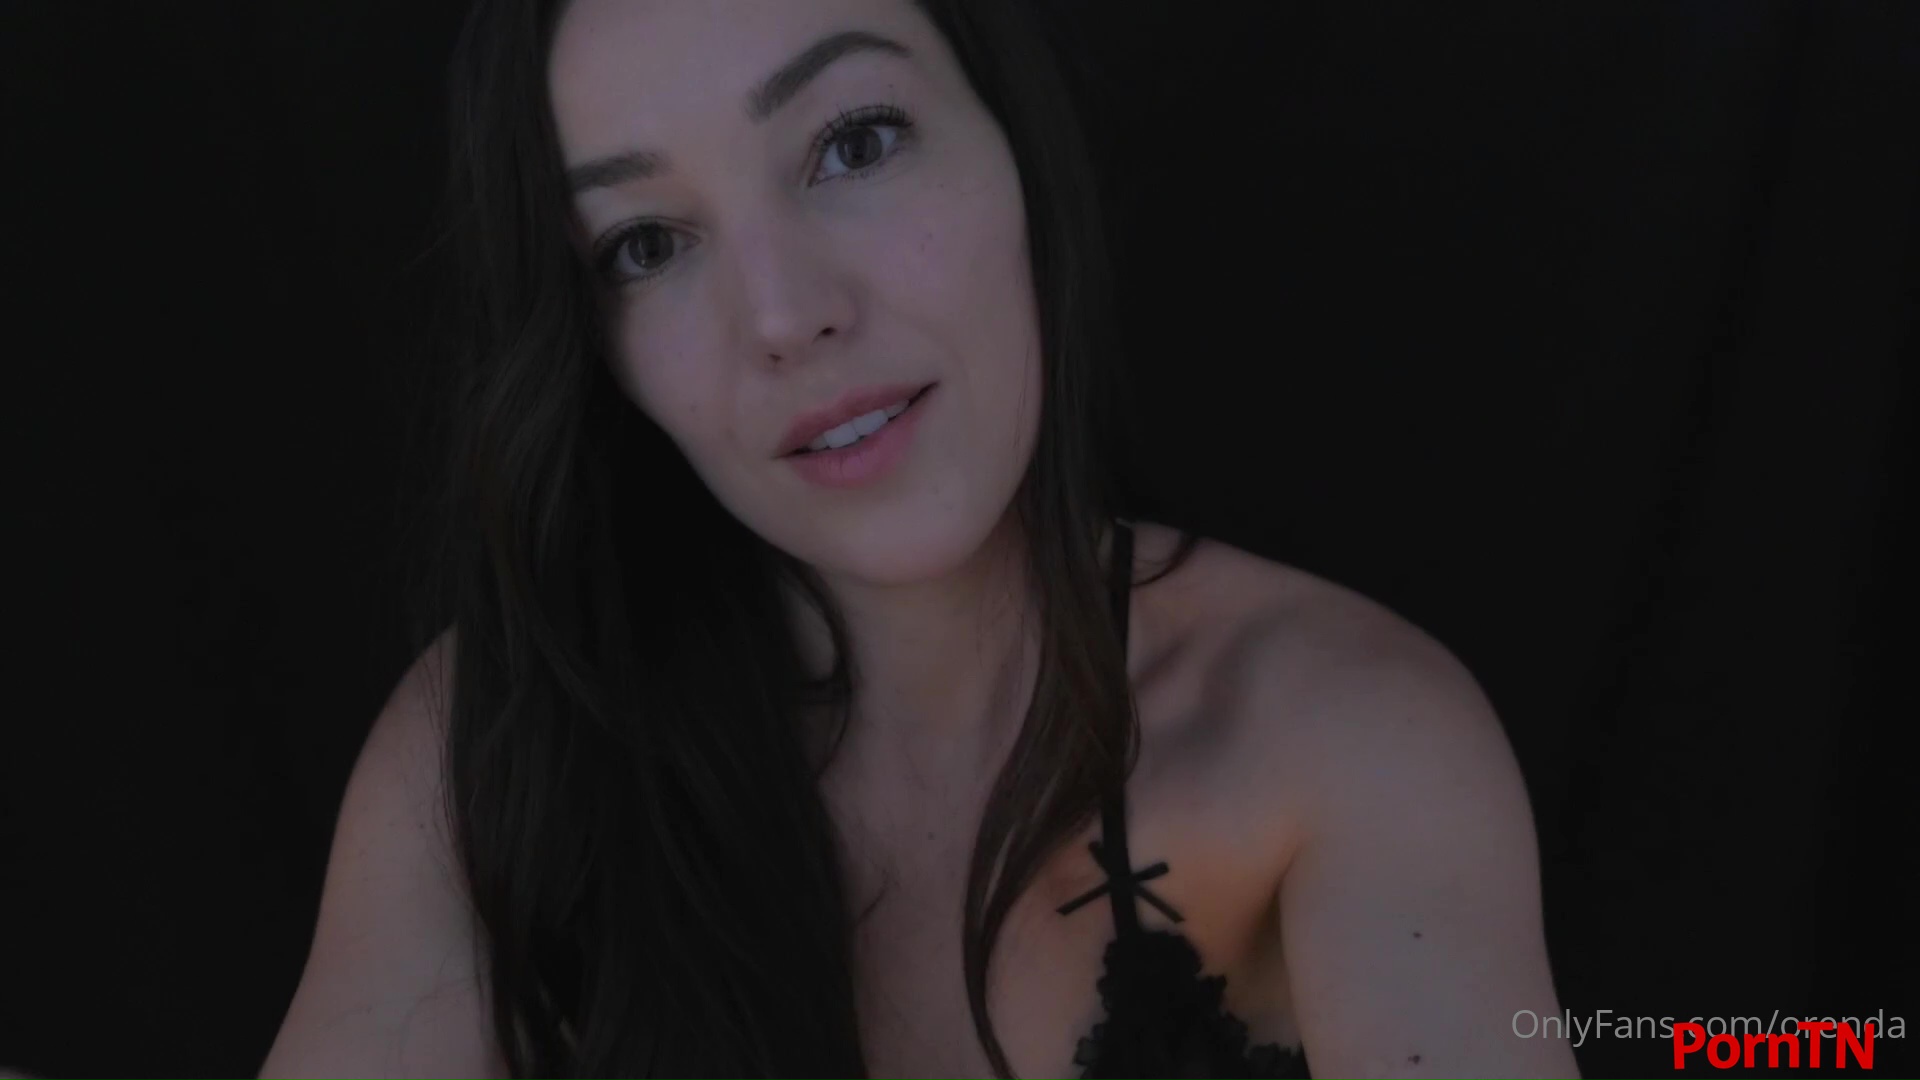 Orenda ASMR OnlyFans - Massage with Edible Lotion Integrating GF Roleplay and Ear Eating